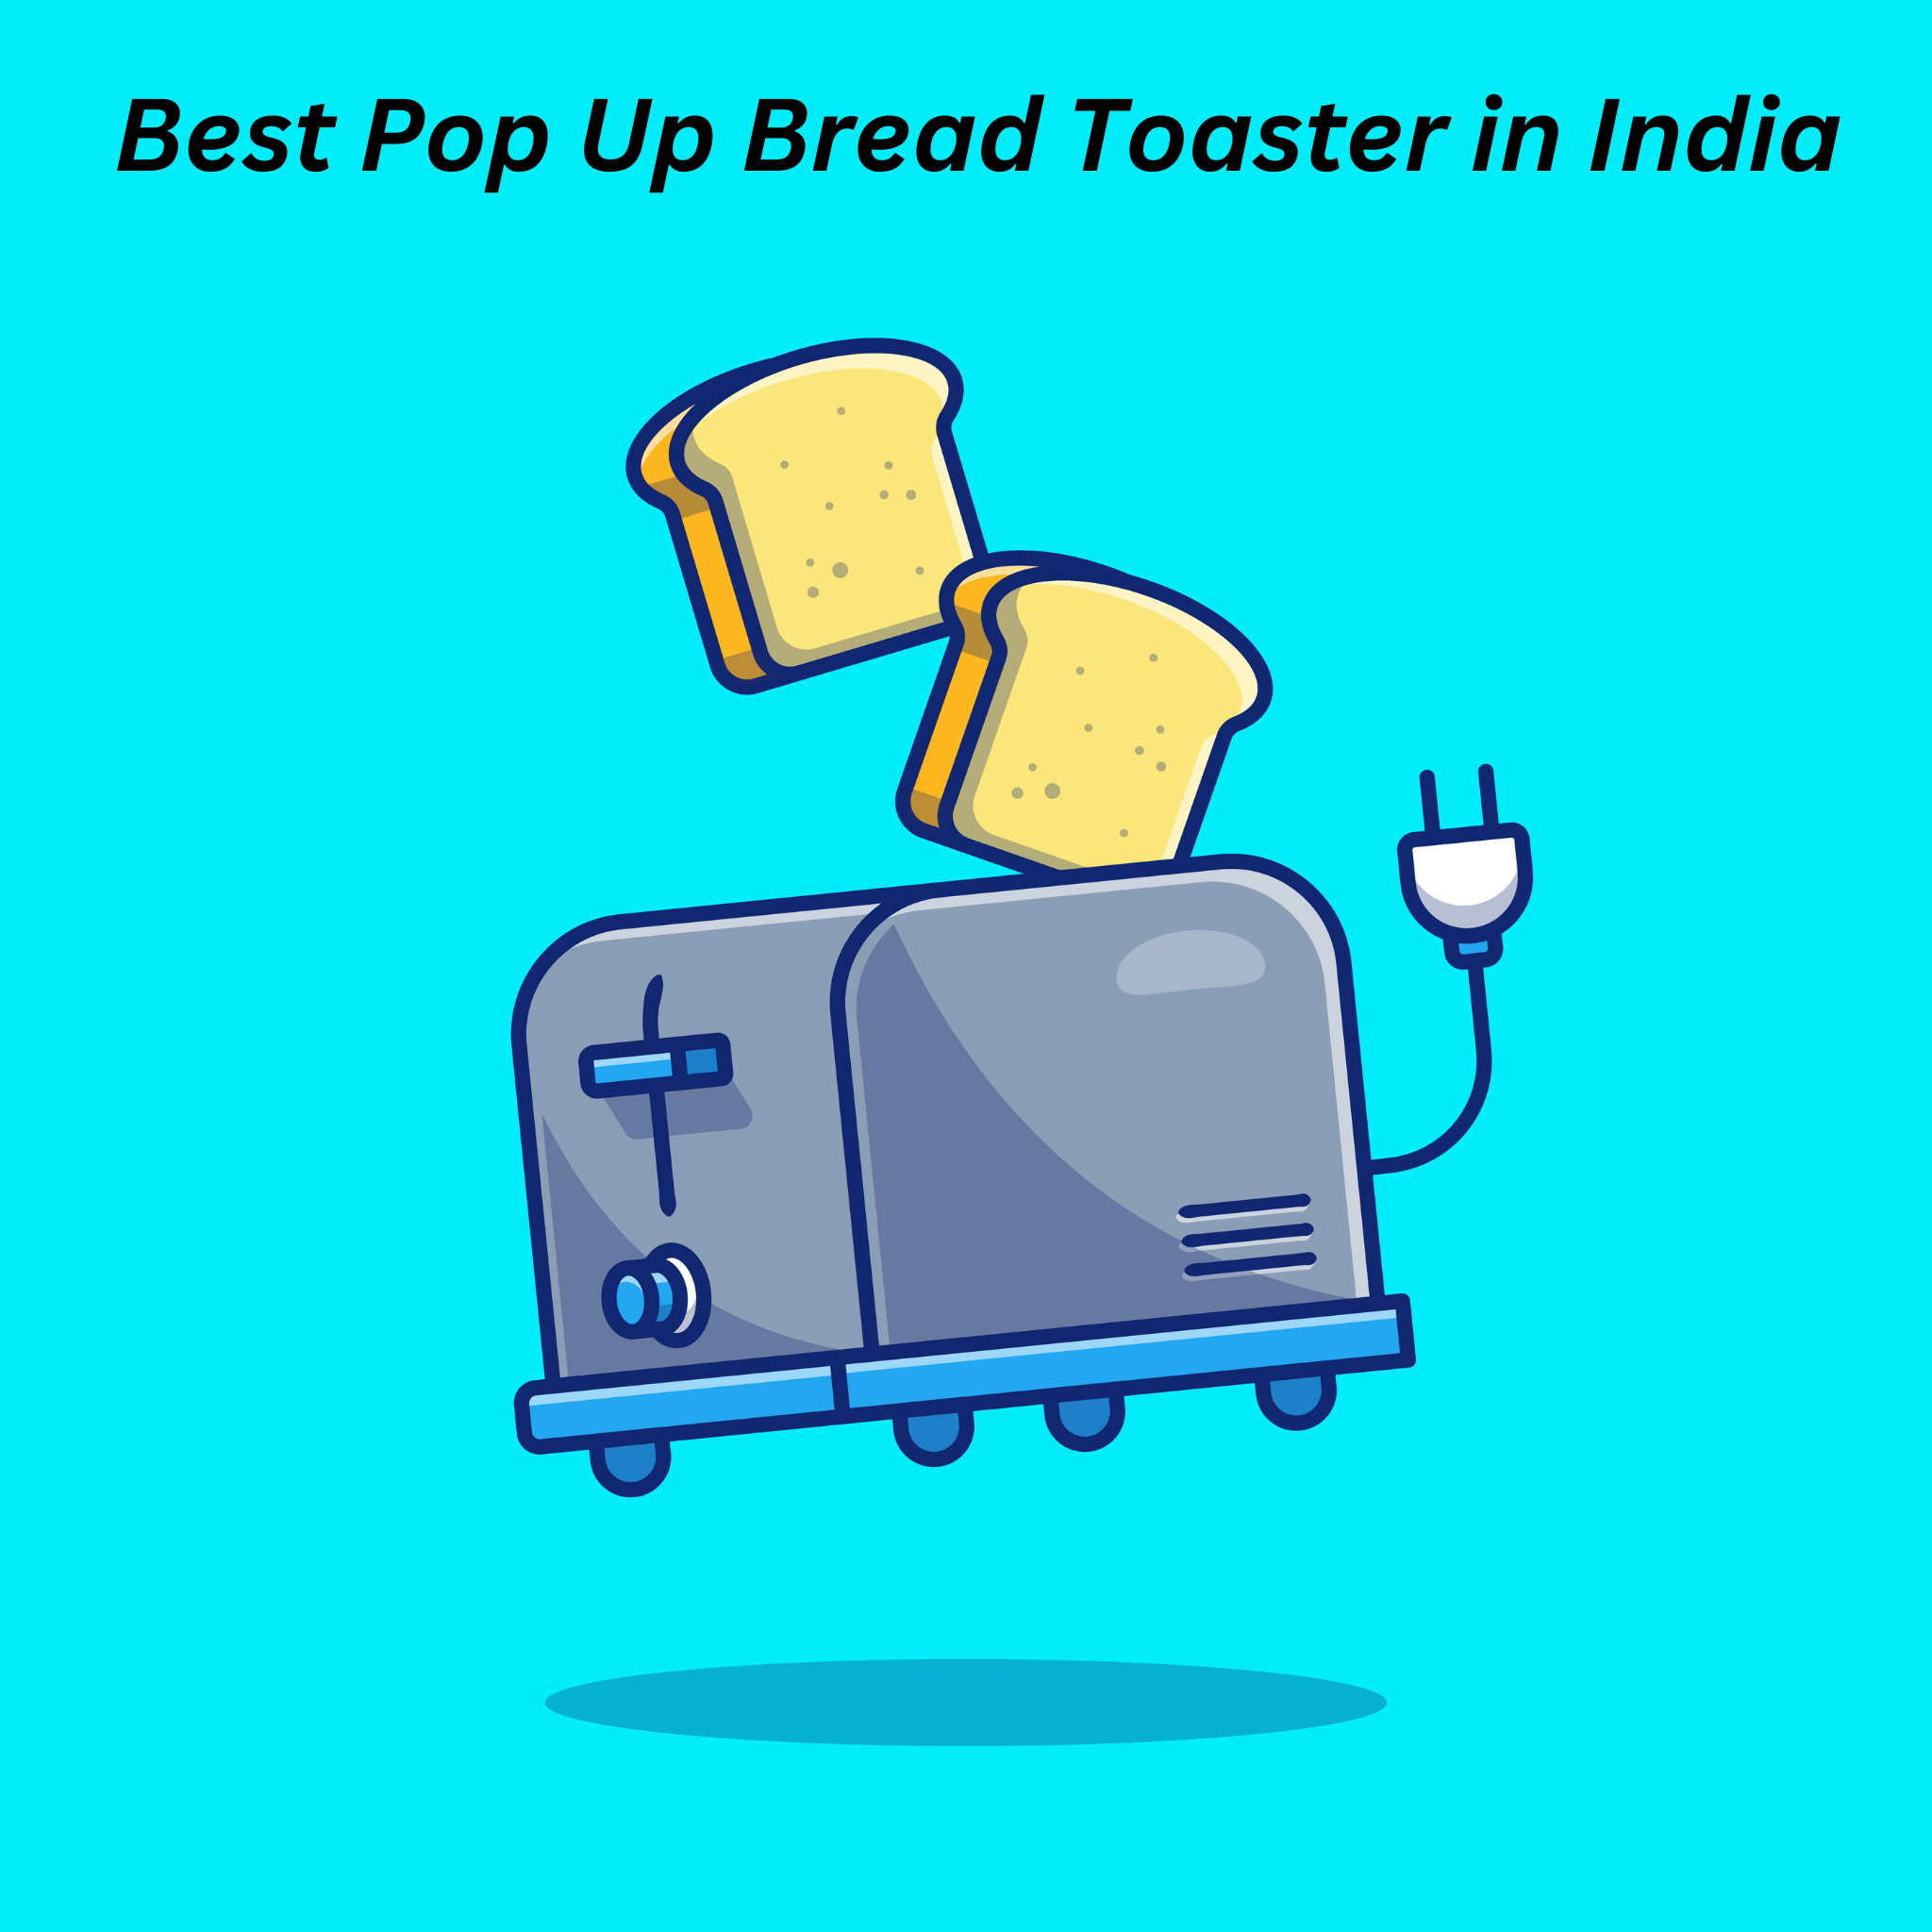 Best Pop Up Bread Toaster in India